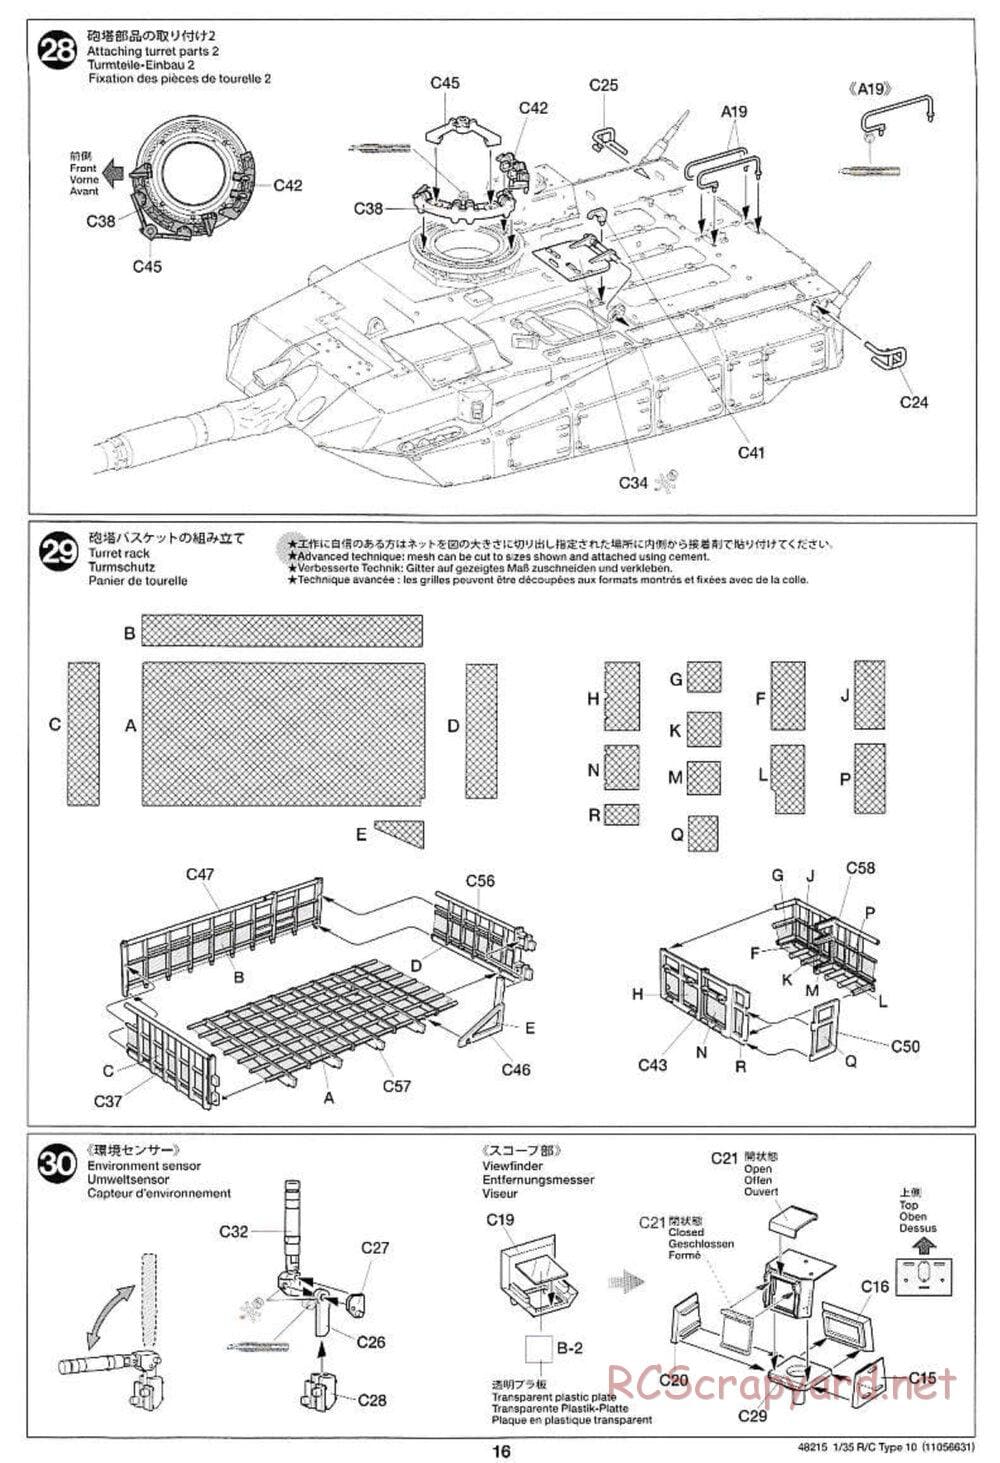 Tamiya - JGSDF Type 10 Tank - 1/35 Scale Chassis - Manual - Page 16